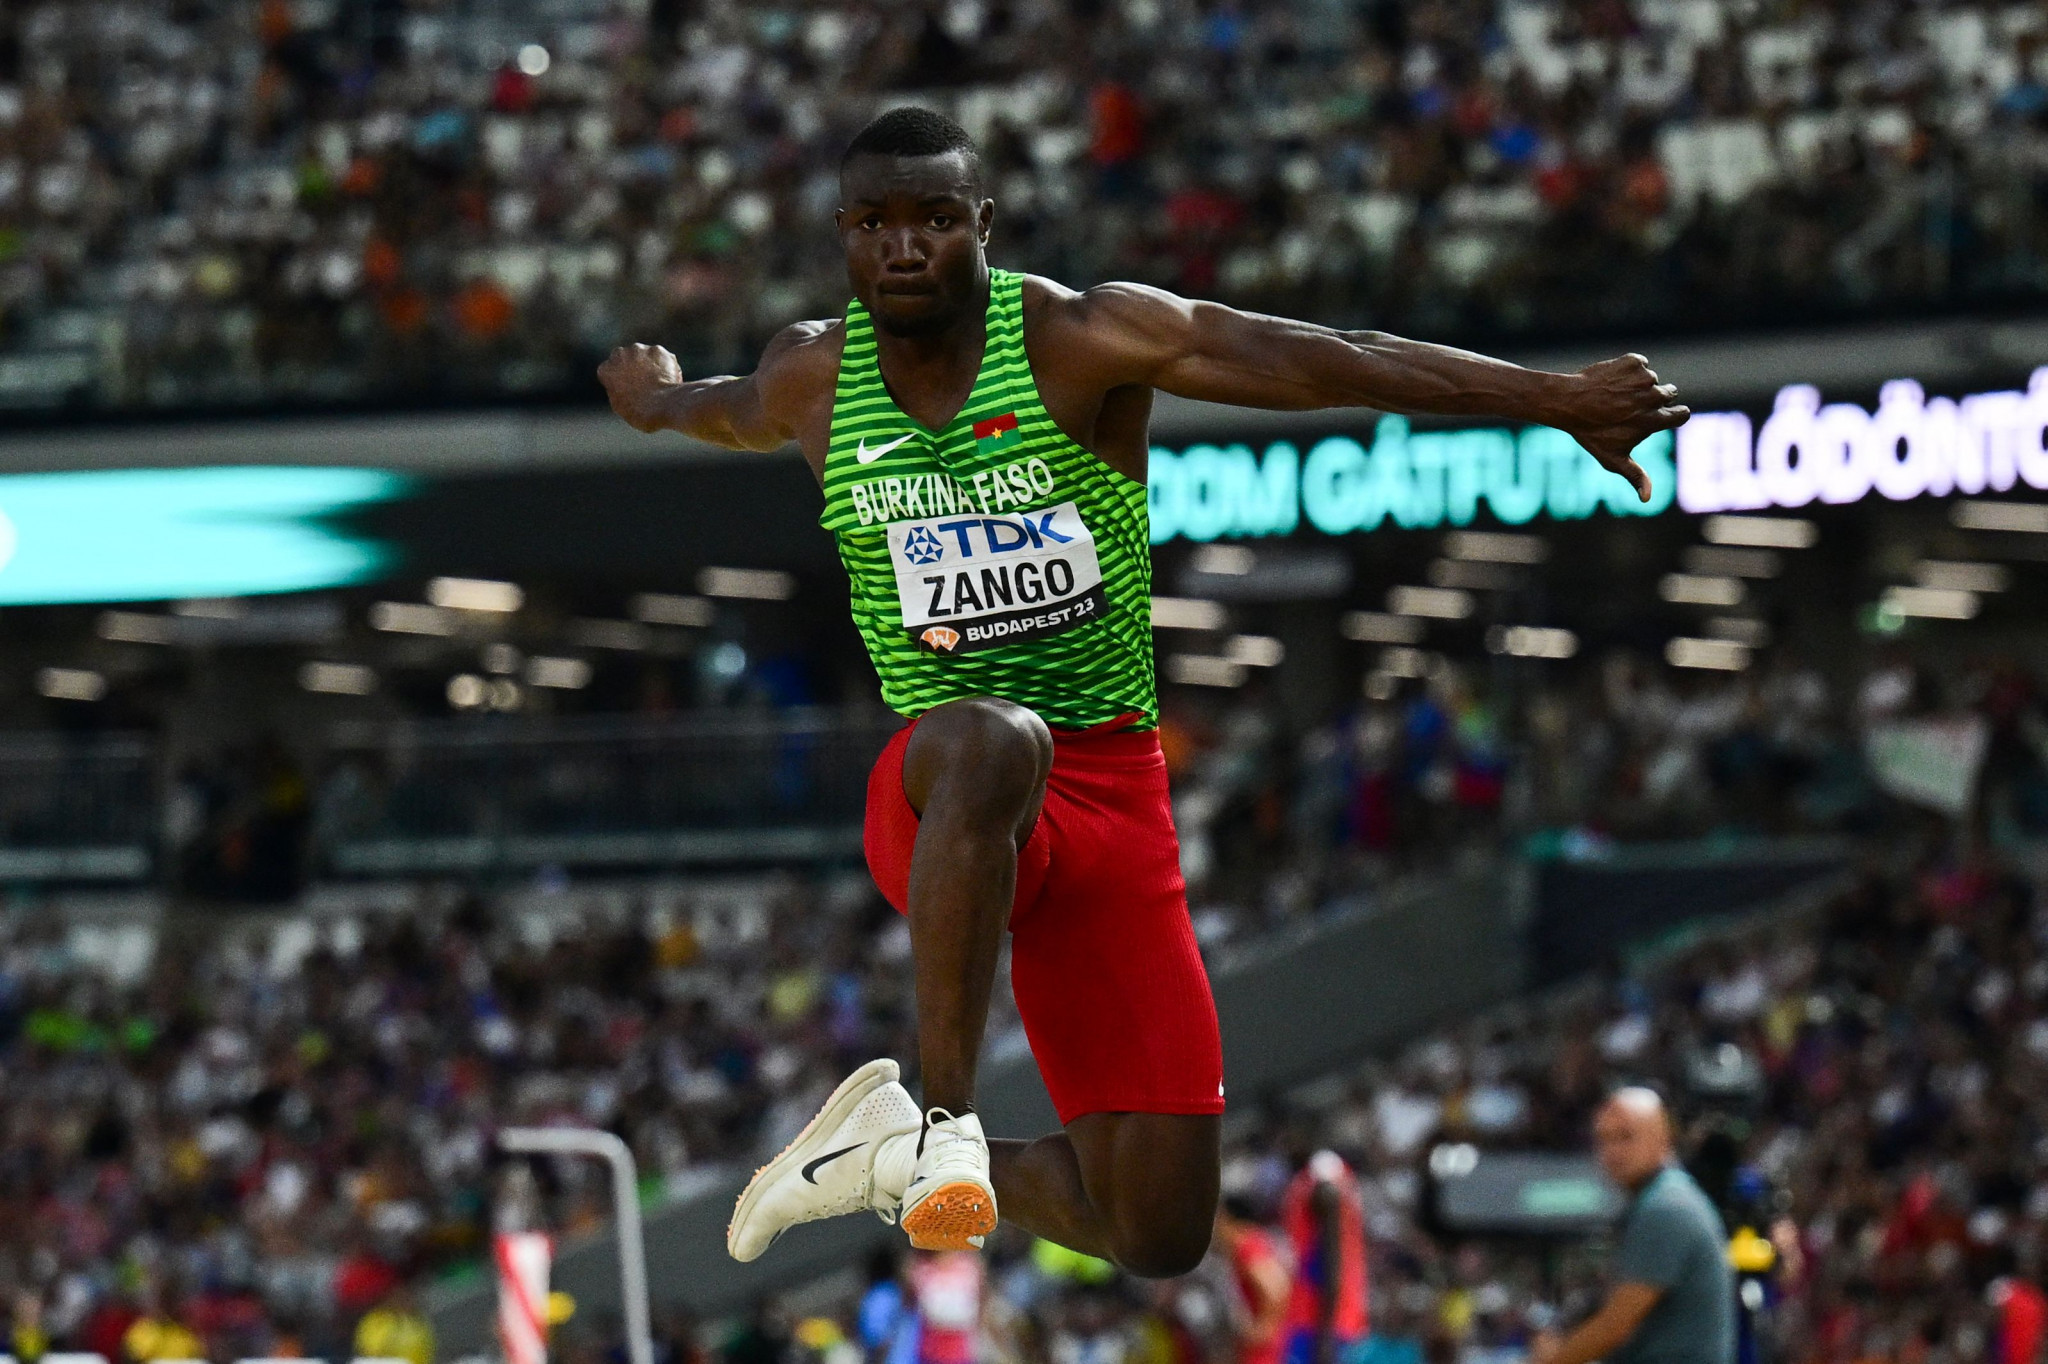 Burkina Faso's Hugues Fabrice Zango took men's triple jump gold after a previous bronze at the Olympics and silver at the World Championships ©Getty Images